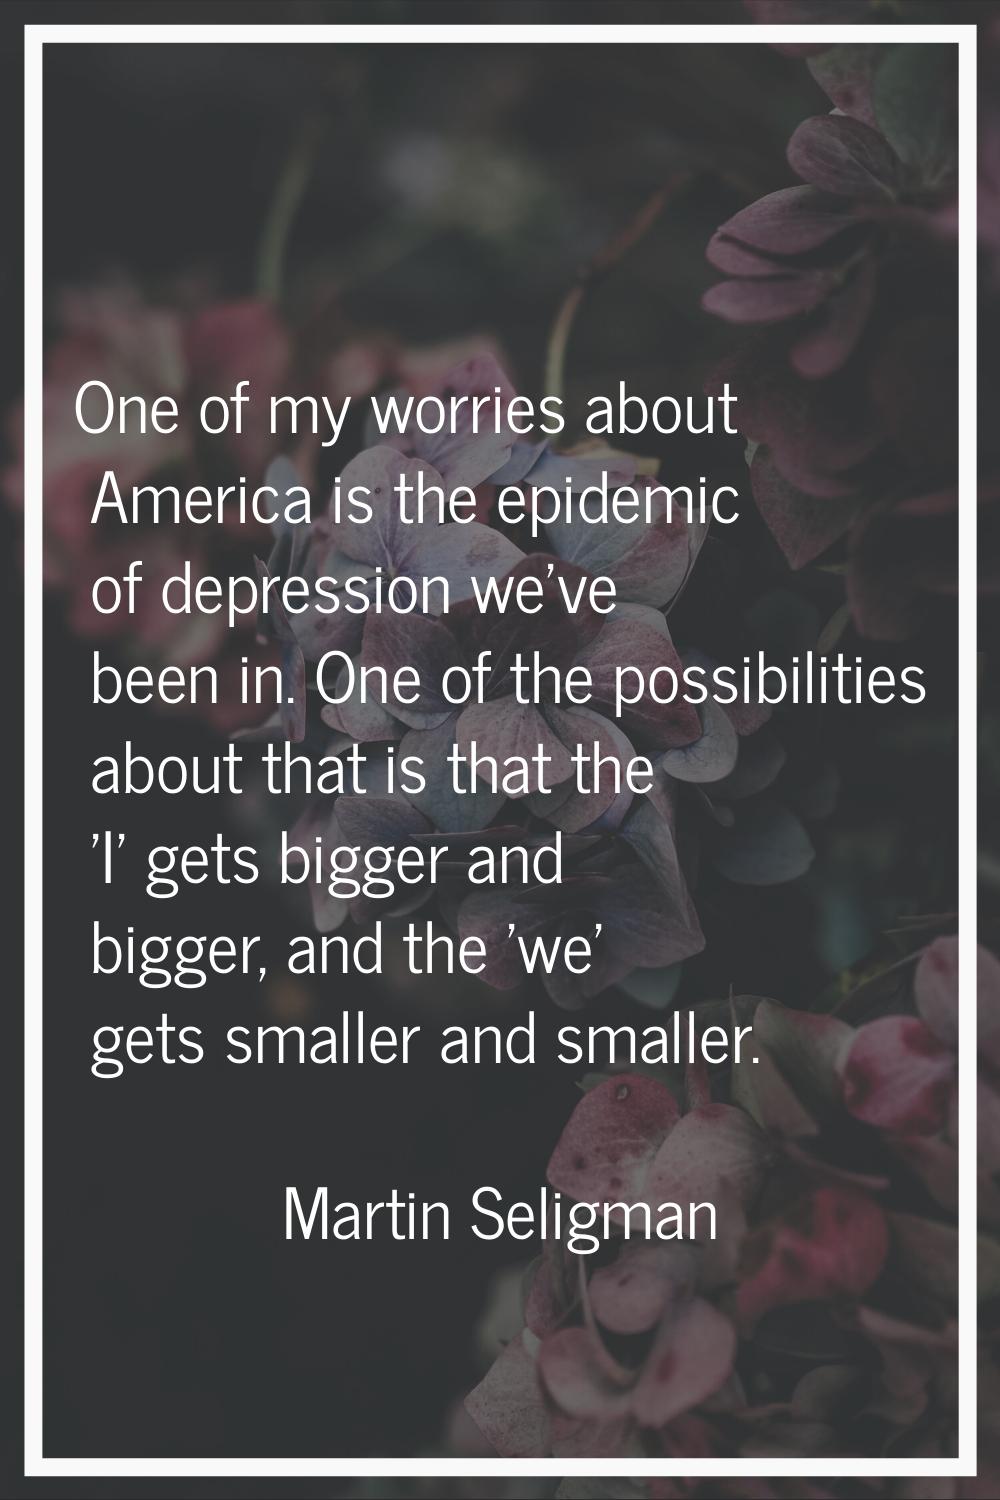 One of my worries about America is the epidemic of depression we've been in. One of the possibiliti